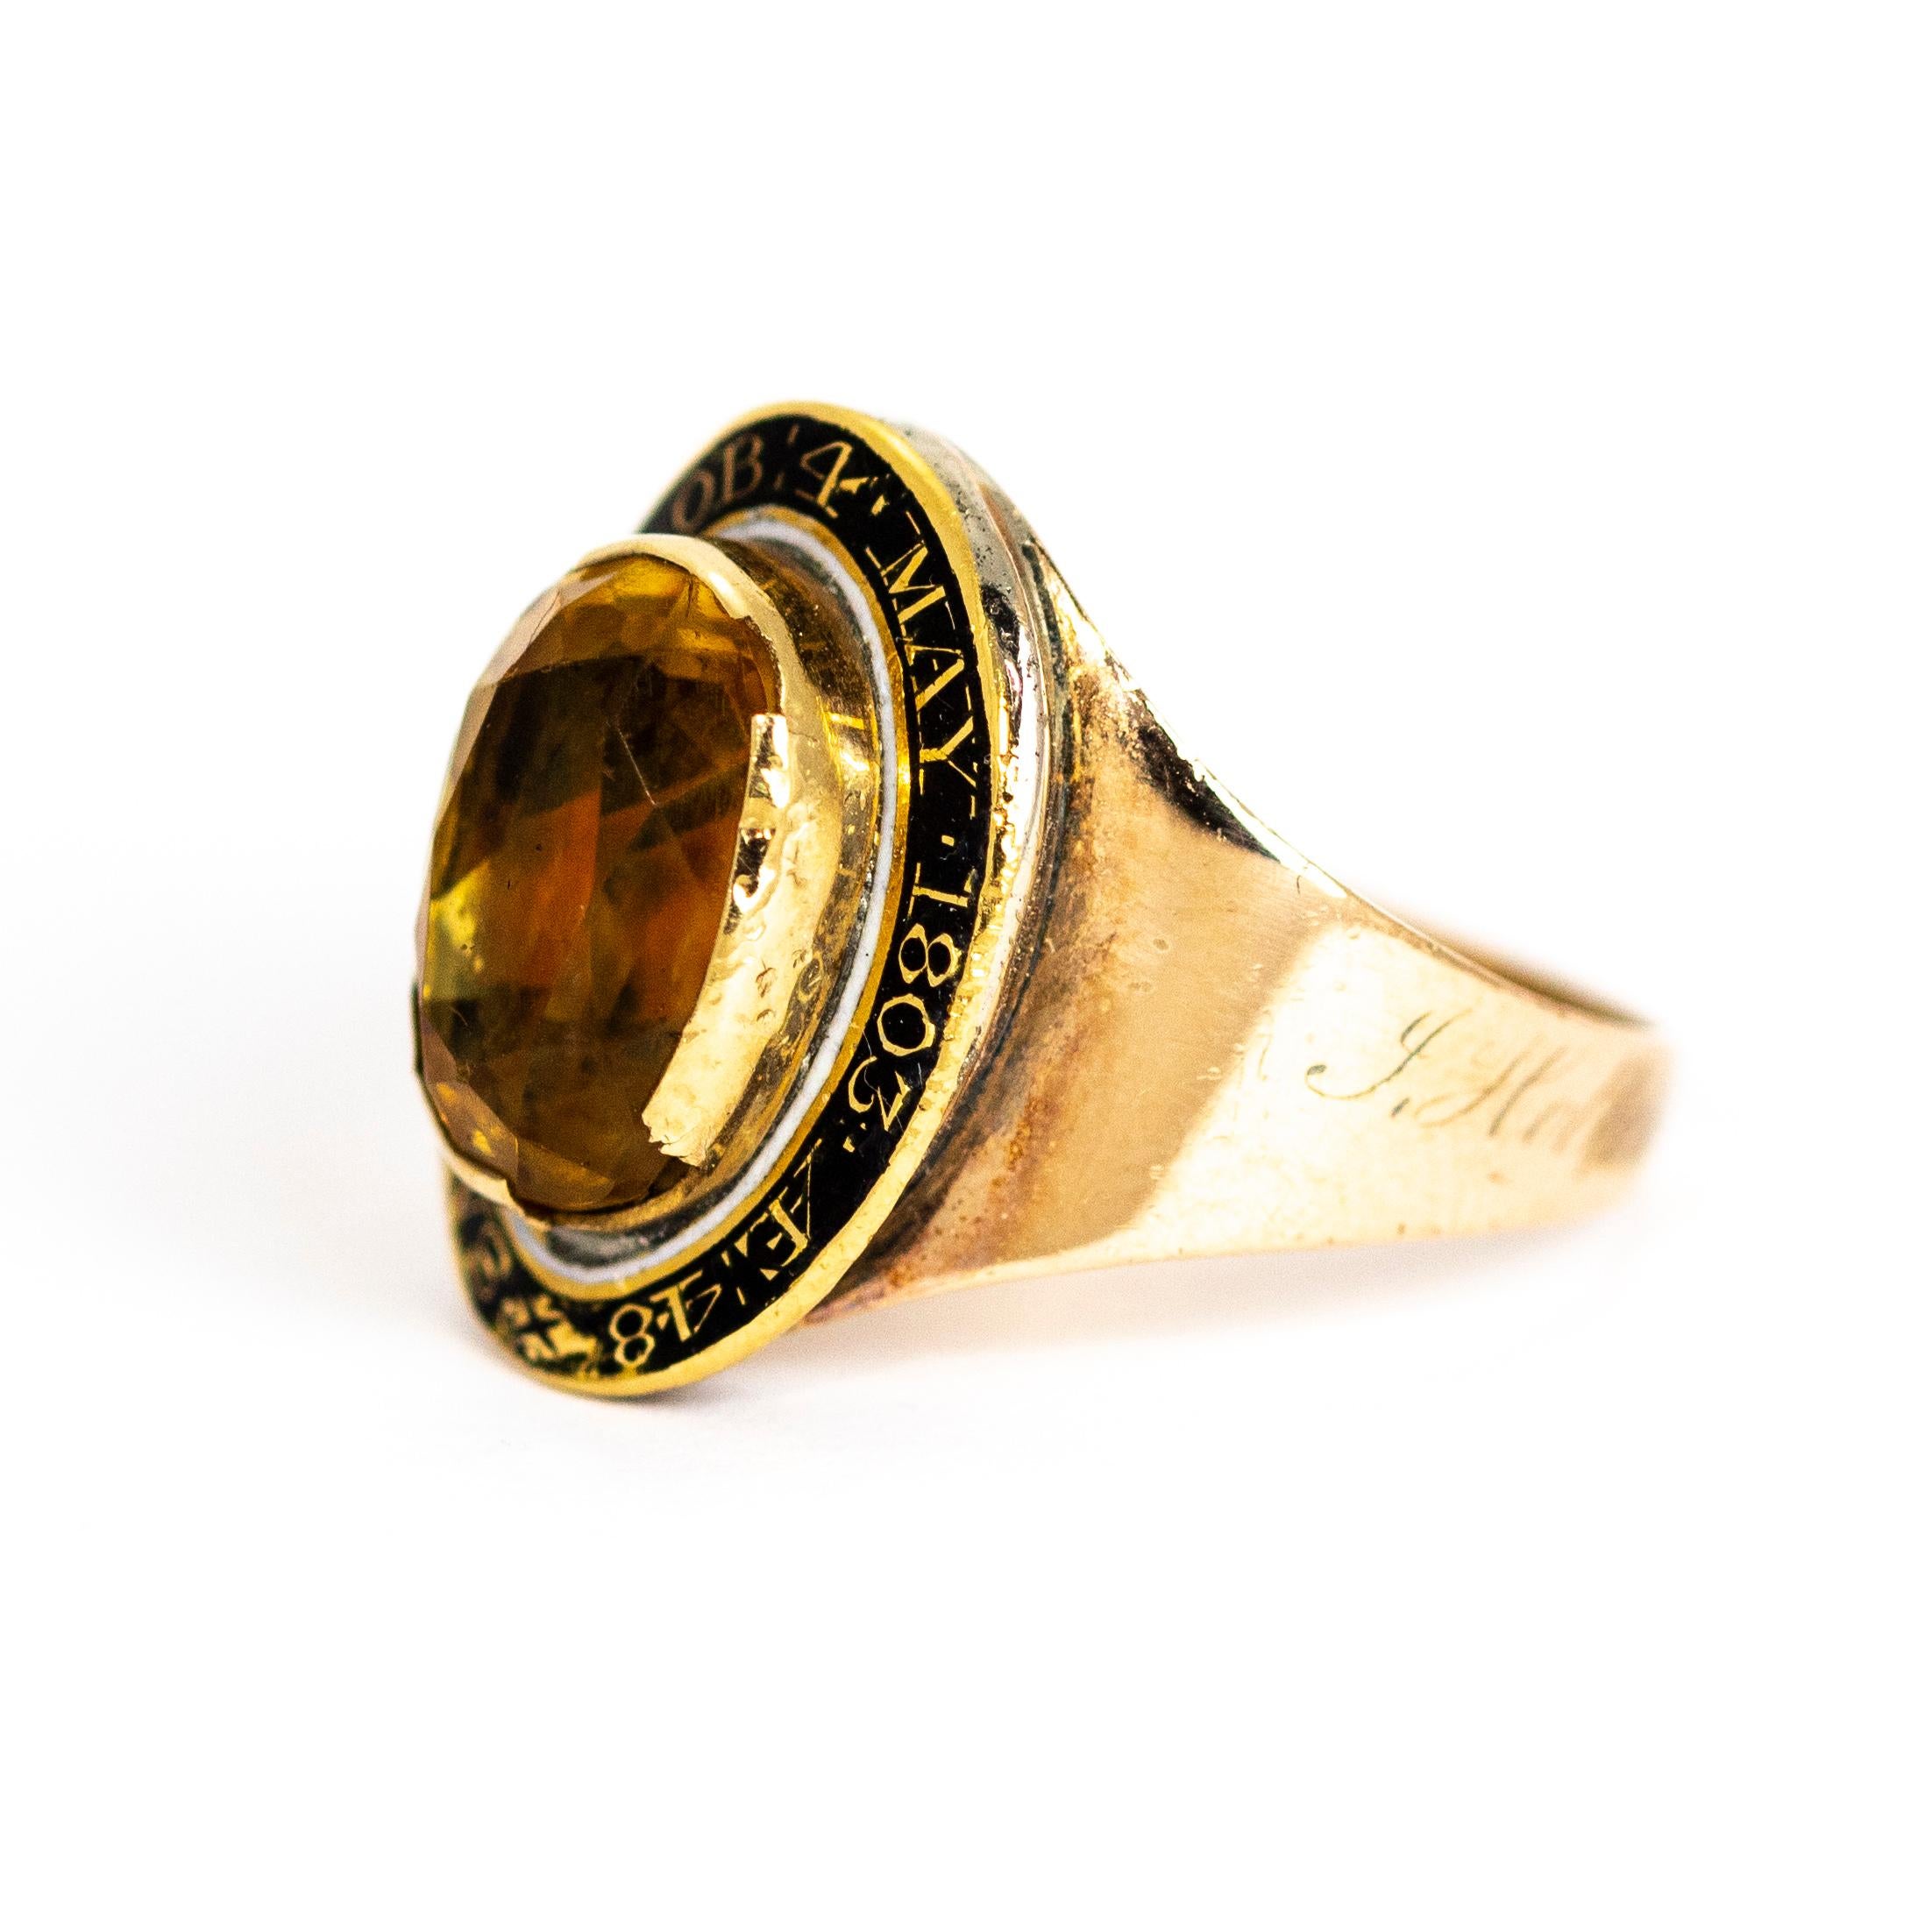 This memorial ring is rather interesting, it has three names on it to be remembered. Around the Citrine inscribed is 